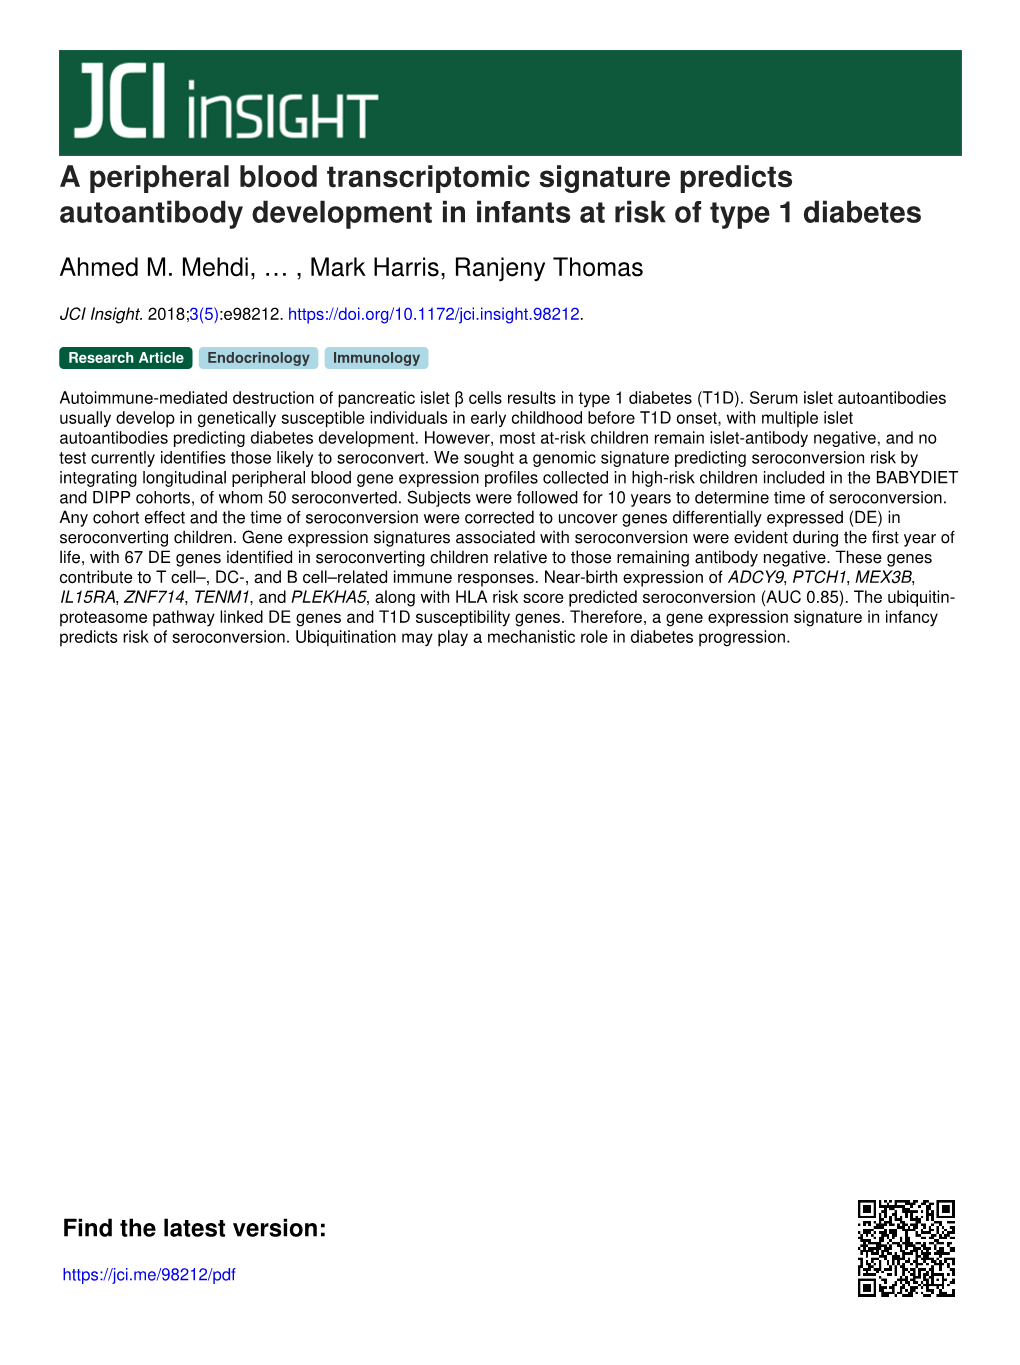 A Peripheral Blood Transcriptomic Signature Predicts Autoantibody Development in Infants at Risk of Type 1 Diabetes